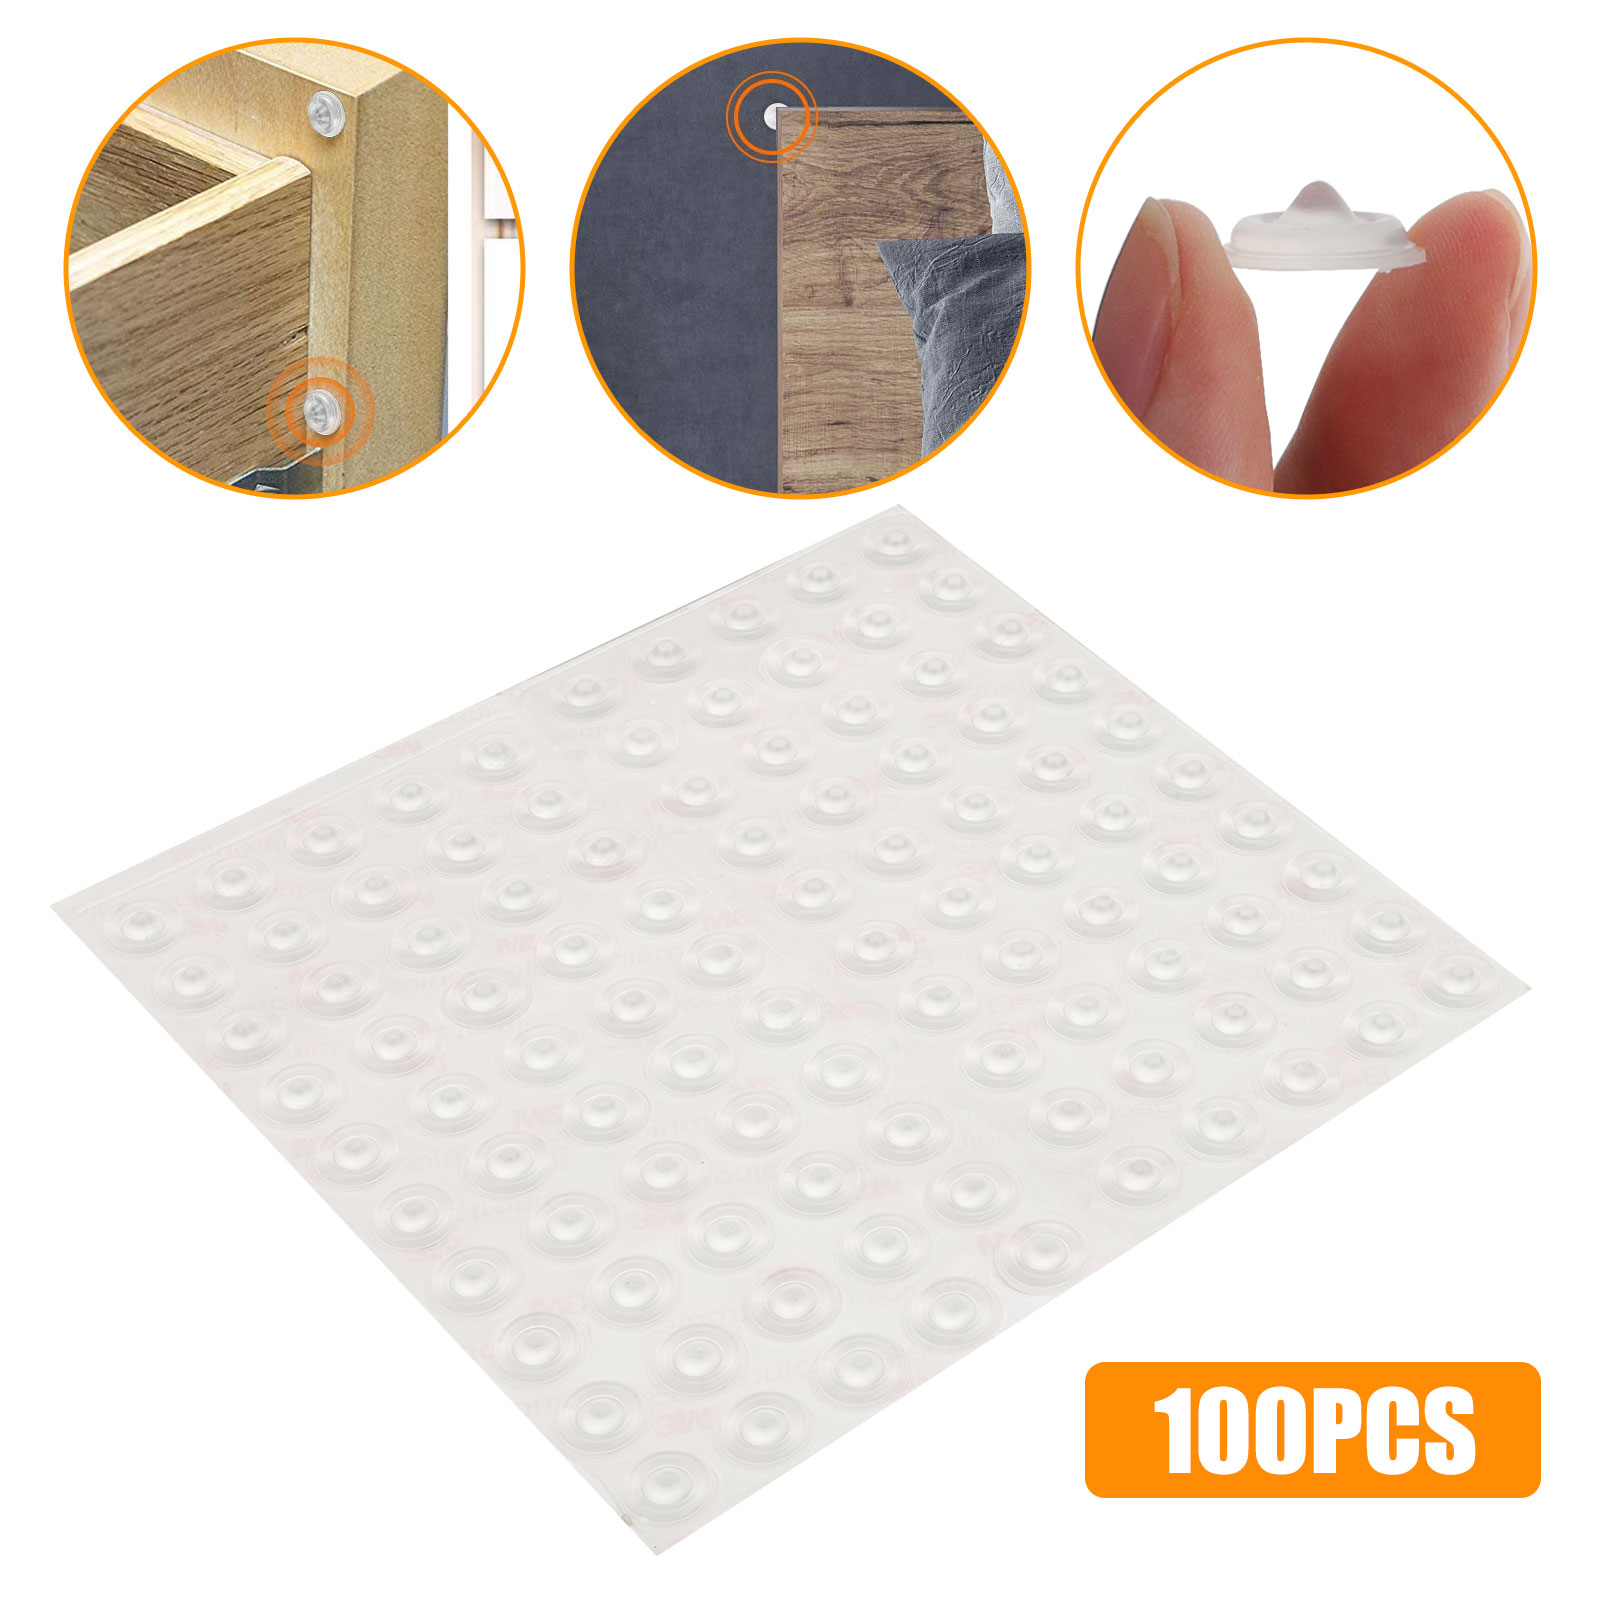 100Pcs Self Adhesive Silicone Feet Bumpers Door Cupboard Drawer Cabinet G$ 